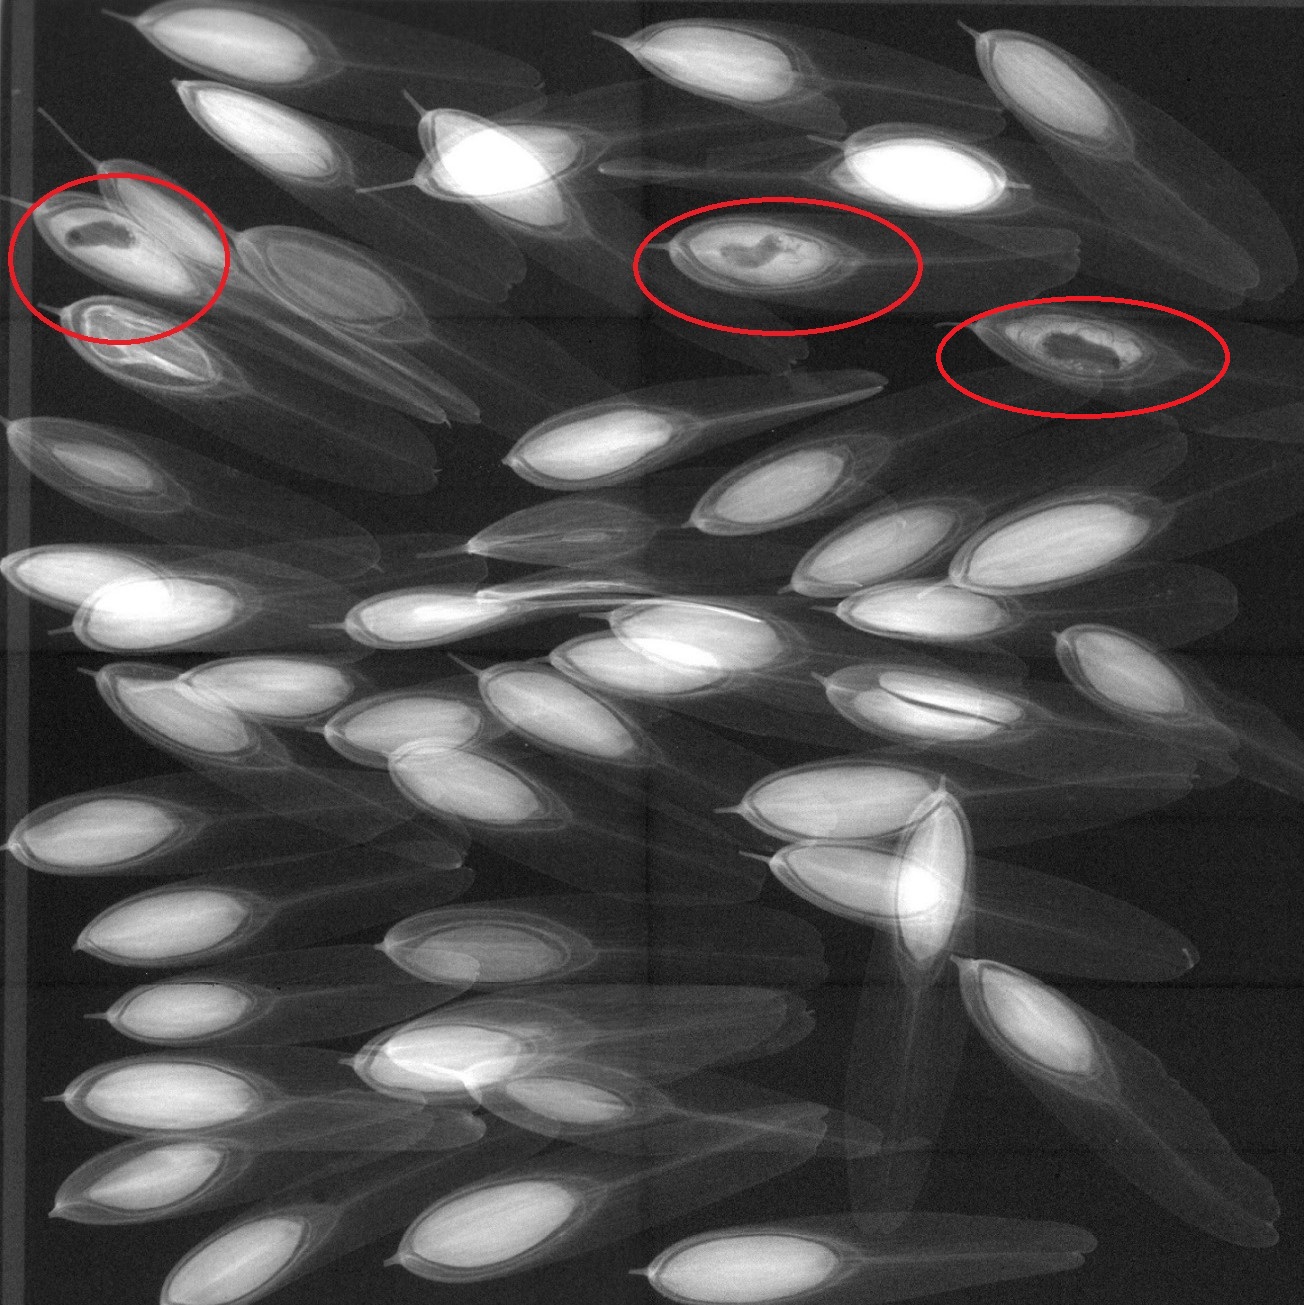 Many white oval healthy seeds, but three seeds are highlighted by red circles. The oval embryos of these seed are greyer than the other and each contain a small dark curved arc within them where the larva is